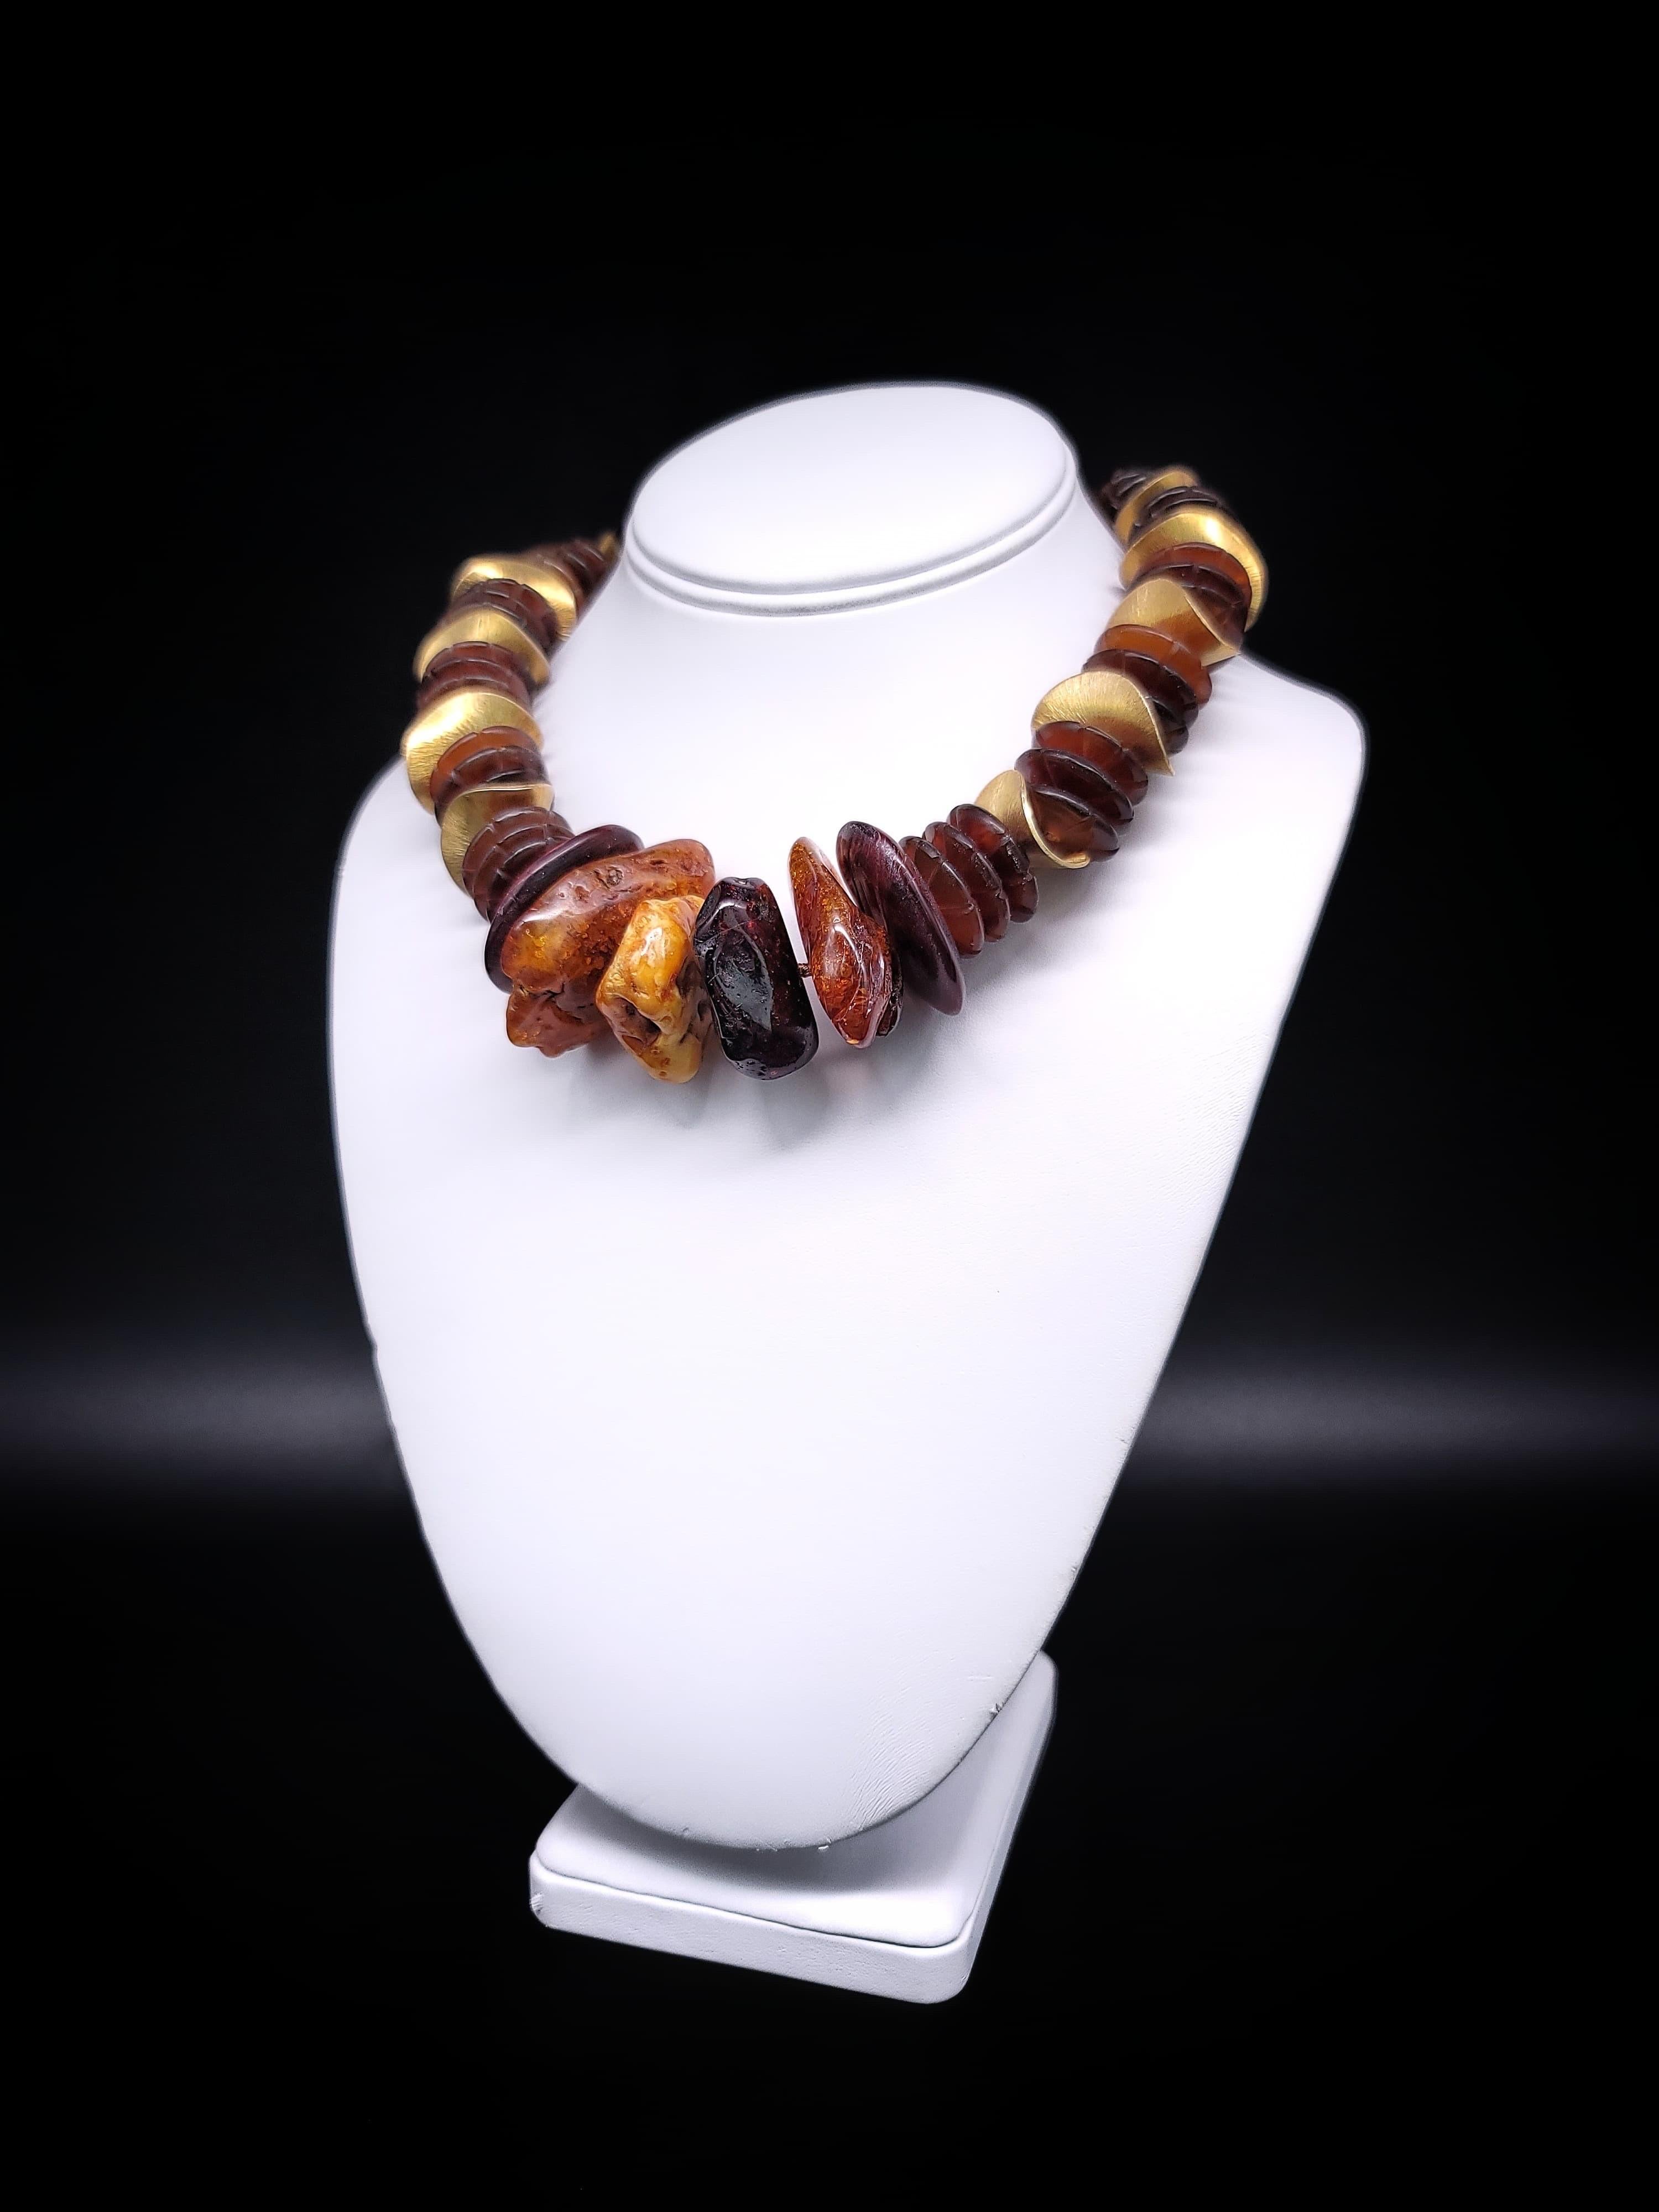 This one-of-a-kind necklace is a unique blend of different elements that come together in perfect harmony. The warm, honey-colored Baltic Amber beads and intricately polished and carved wooden beads from the Philippines make for an unusual yet